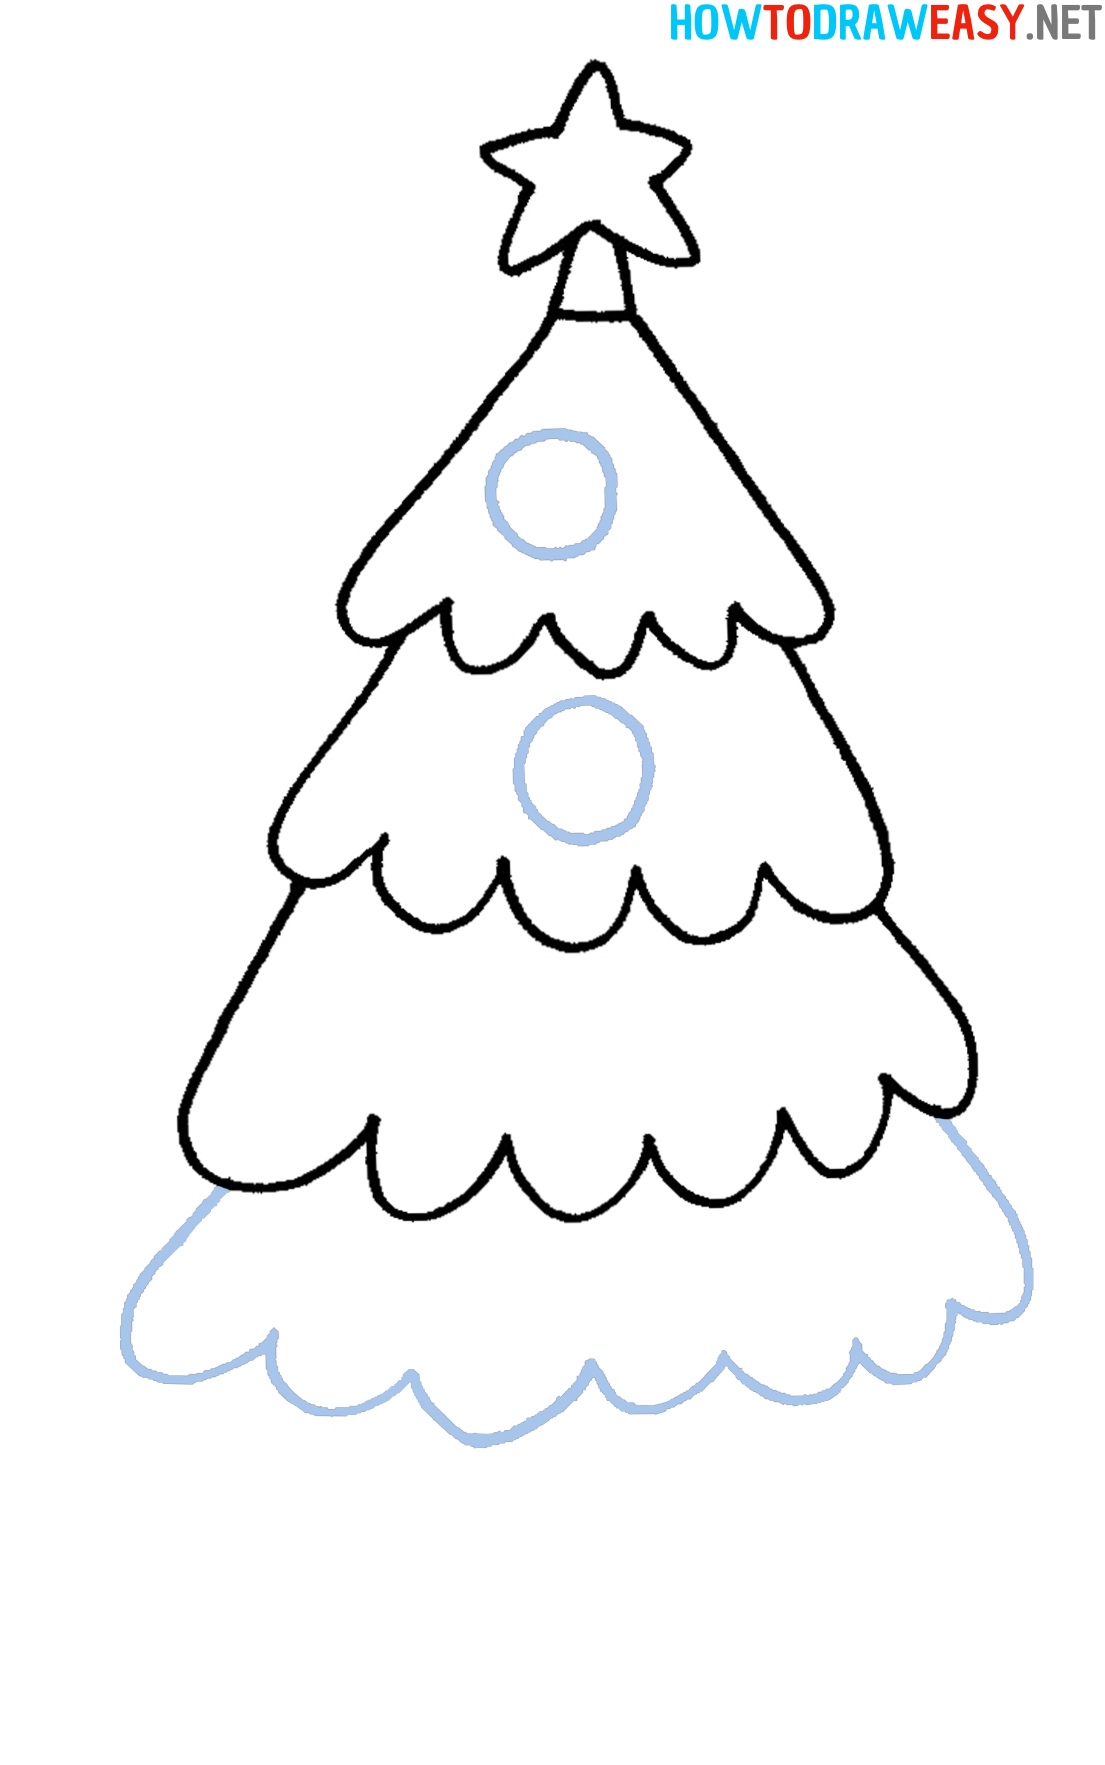 How to Sketch an Easy Christmas Tree